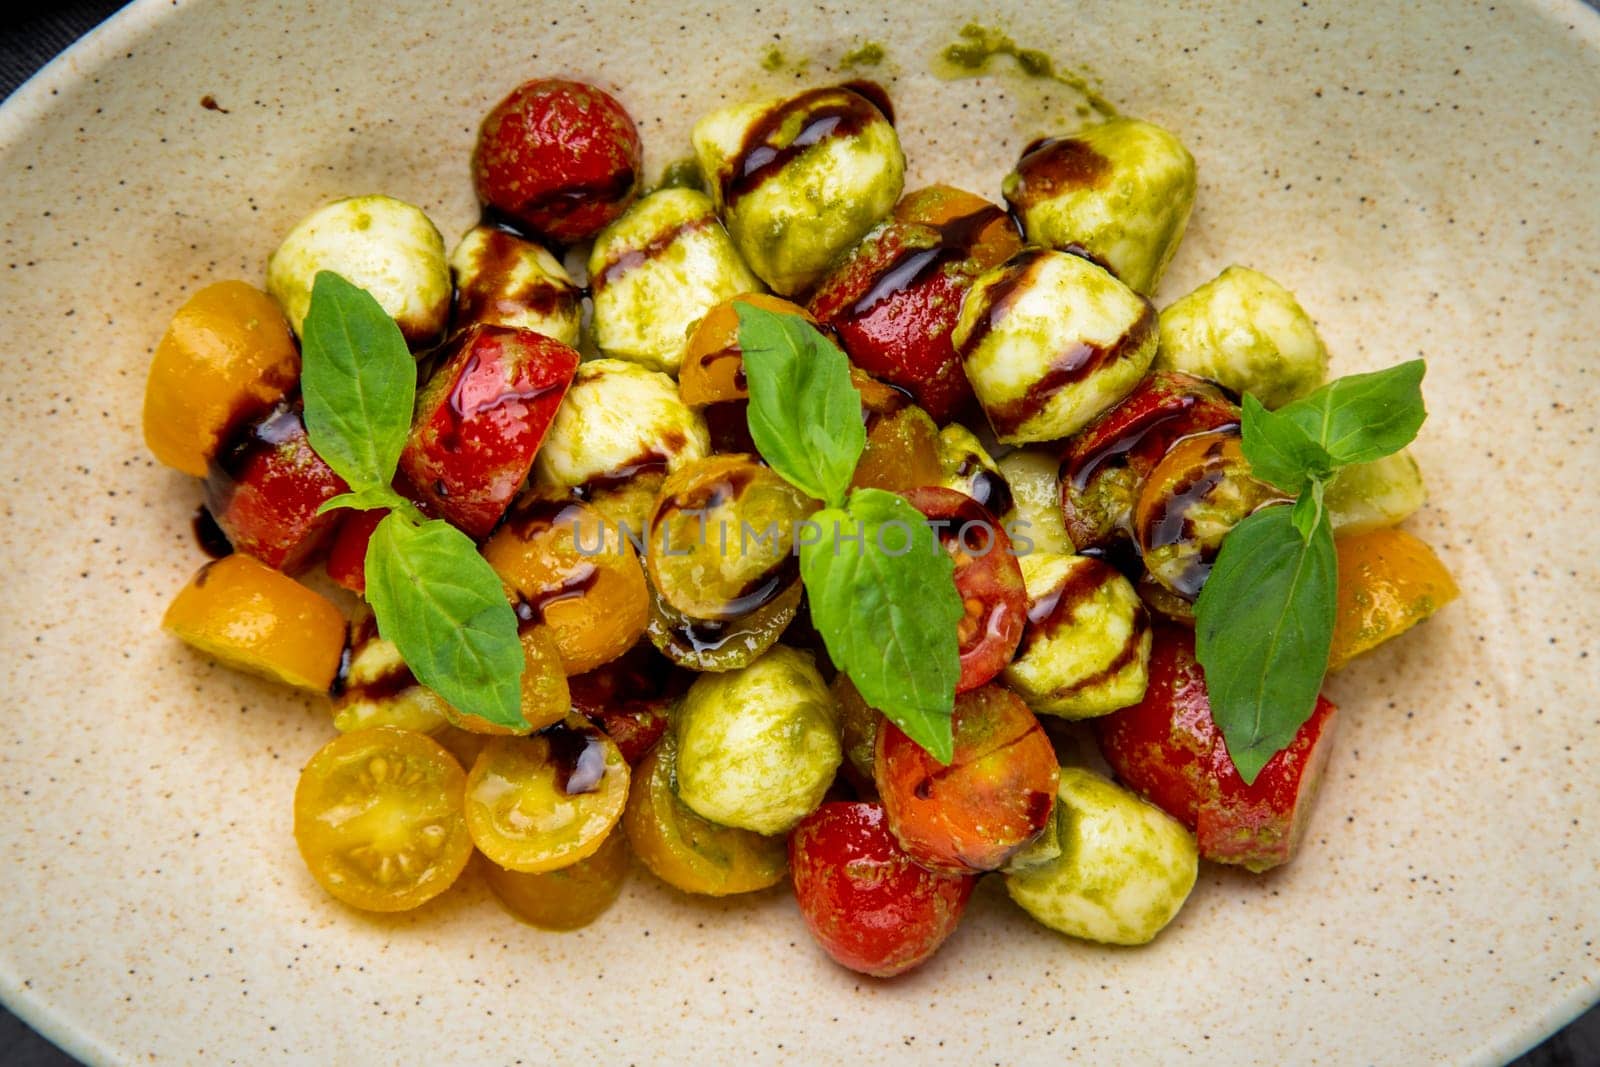 salad of yellow and red cherry tomatoes of different varieties with herbs top view by tewolf